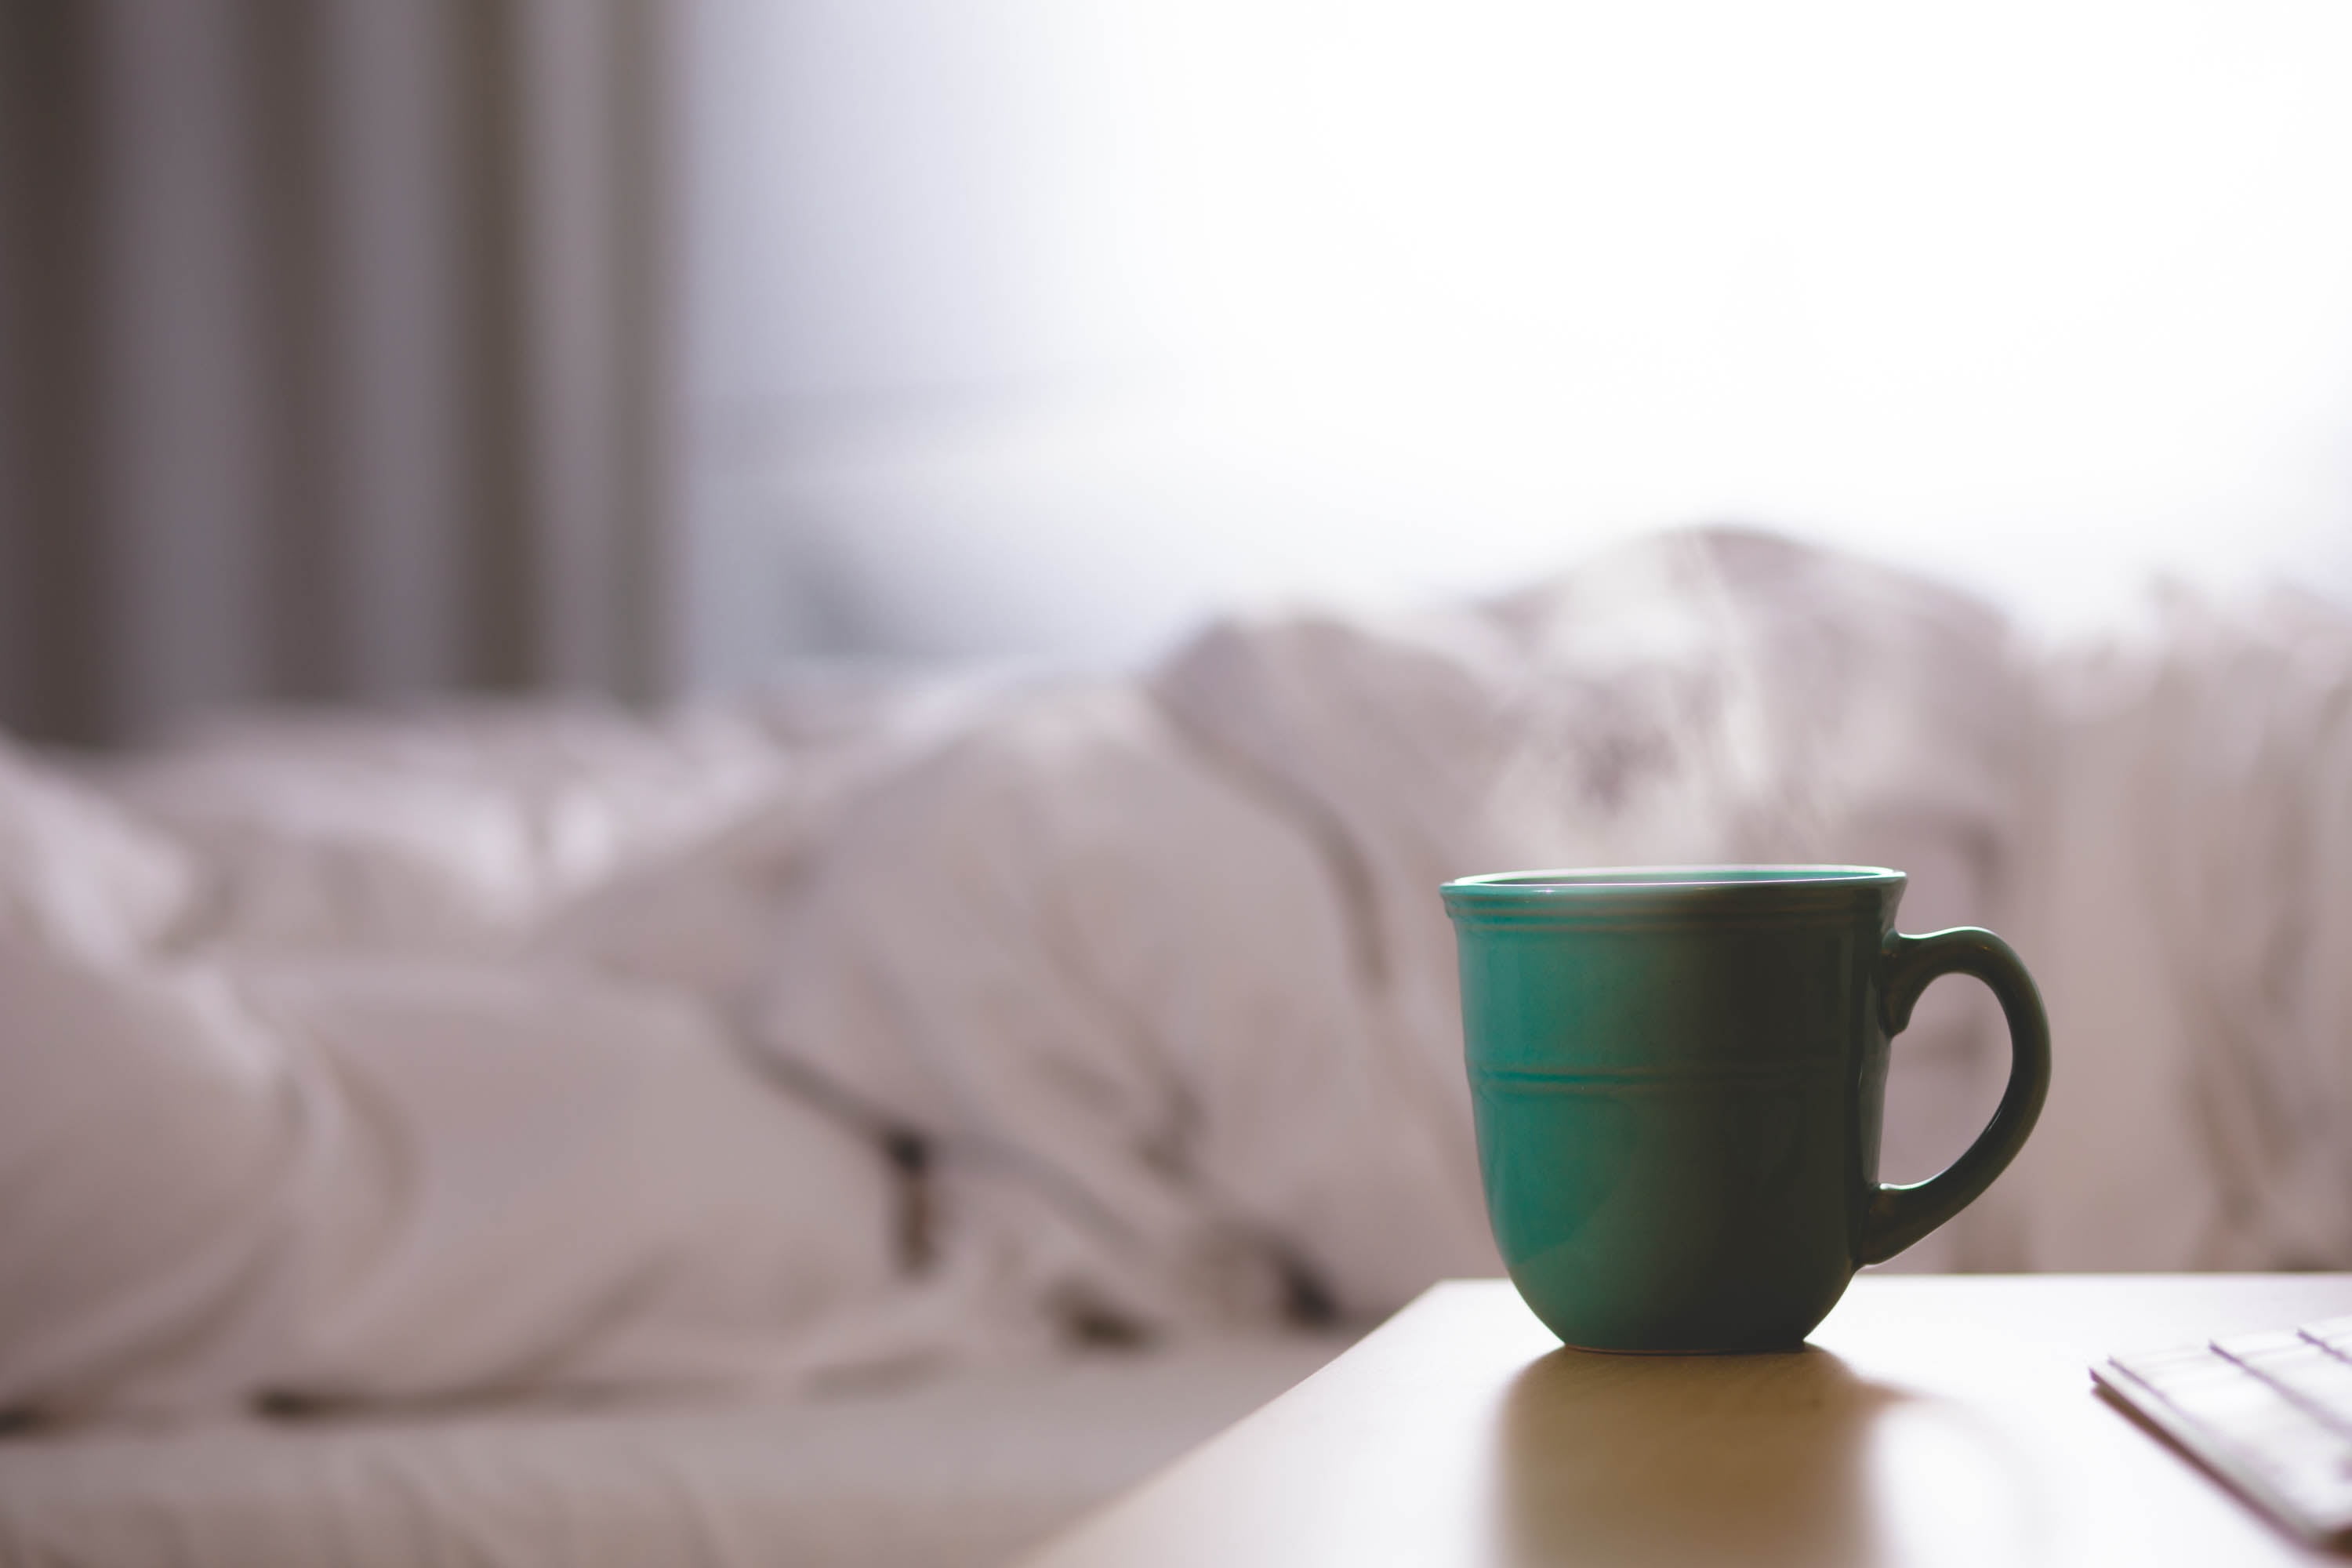 Green steaming teacup on bedside table with big white comforter on bed in background